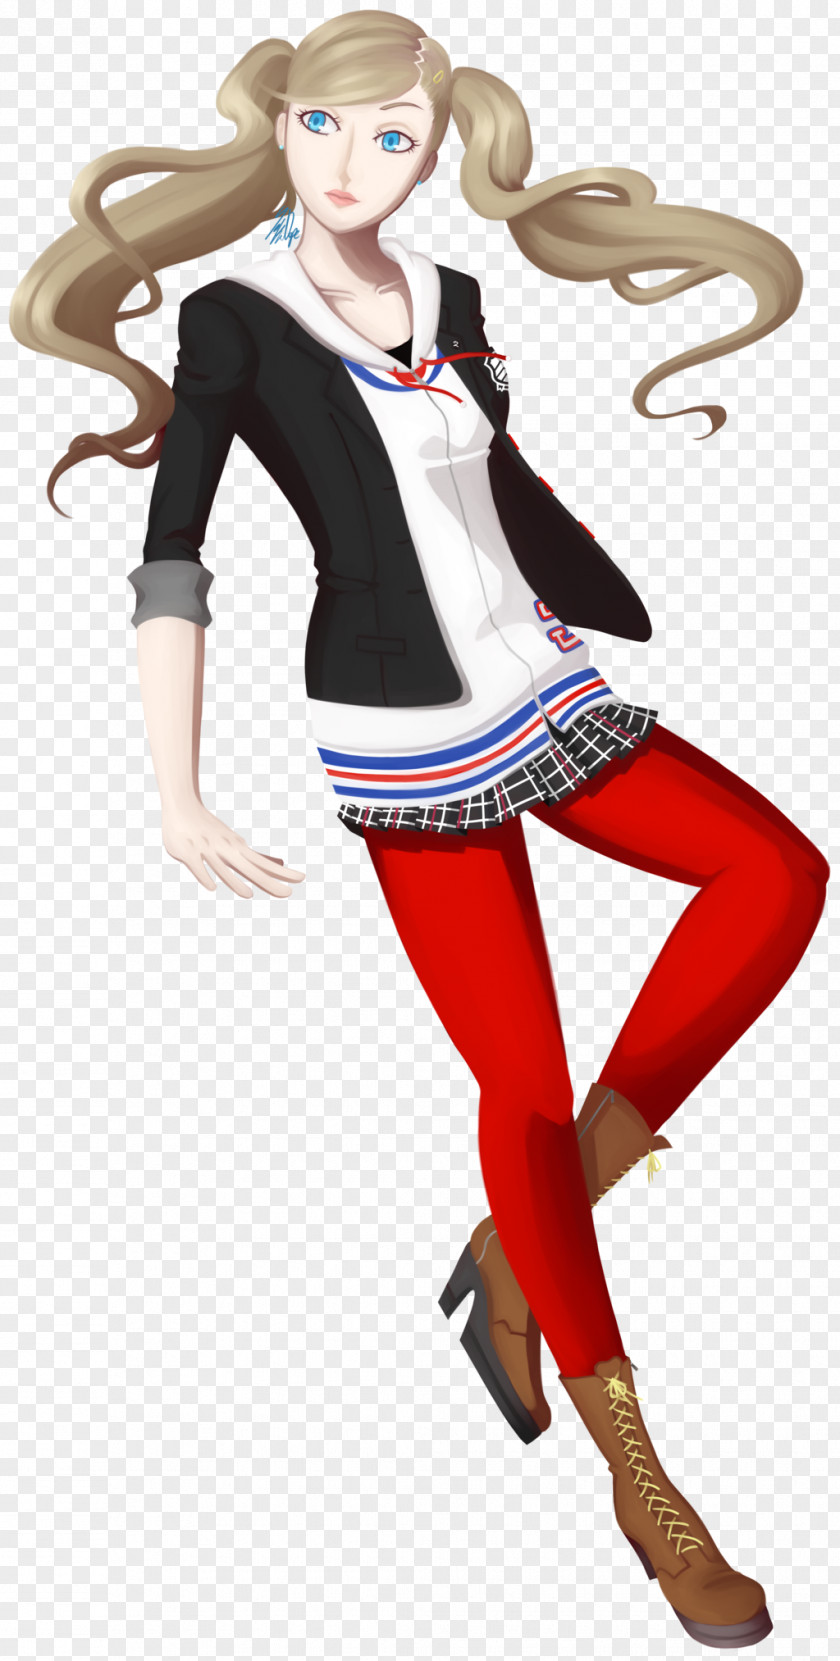 Persona 5 Video Game Shoe Costume Cosplay PNG